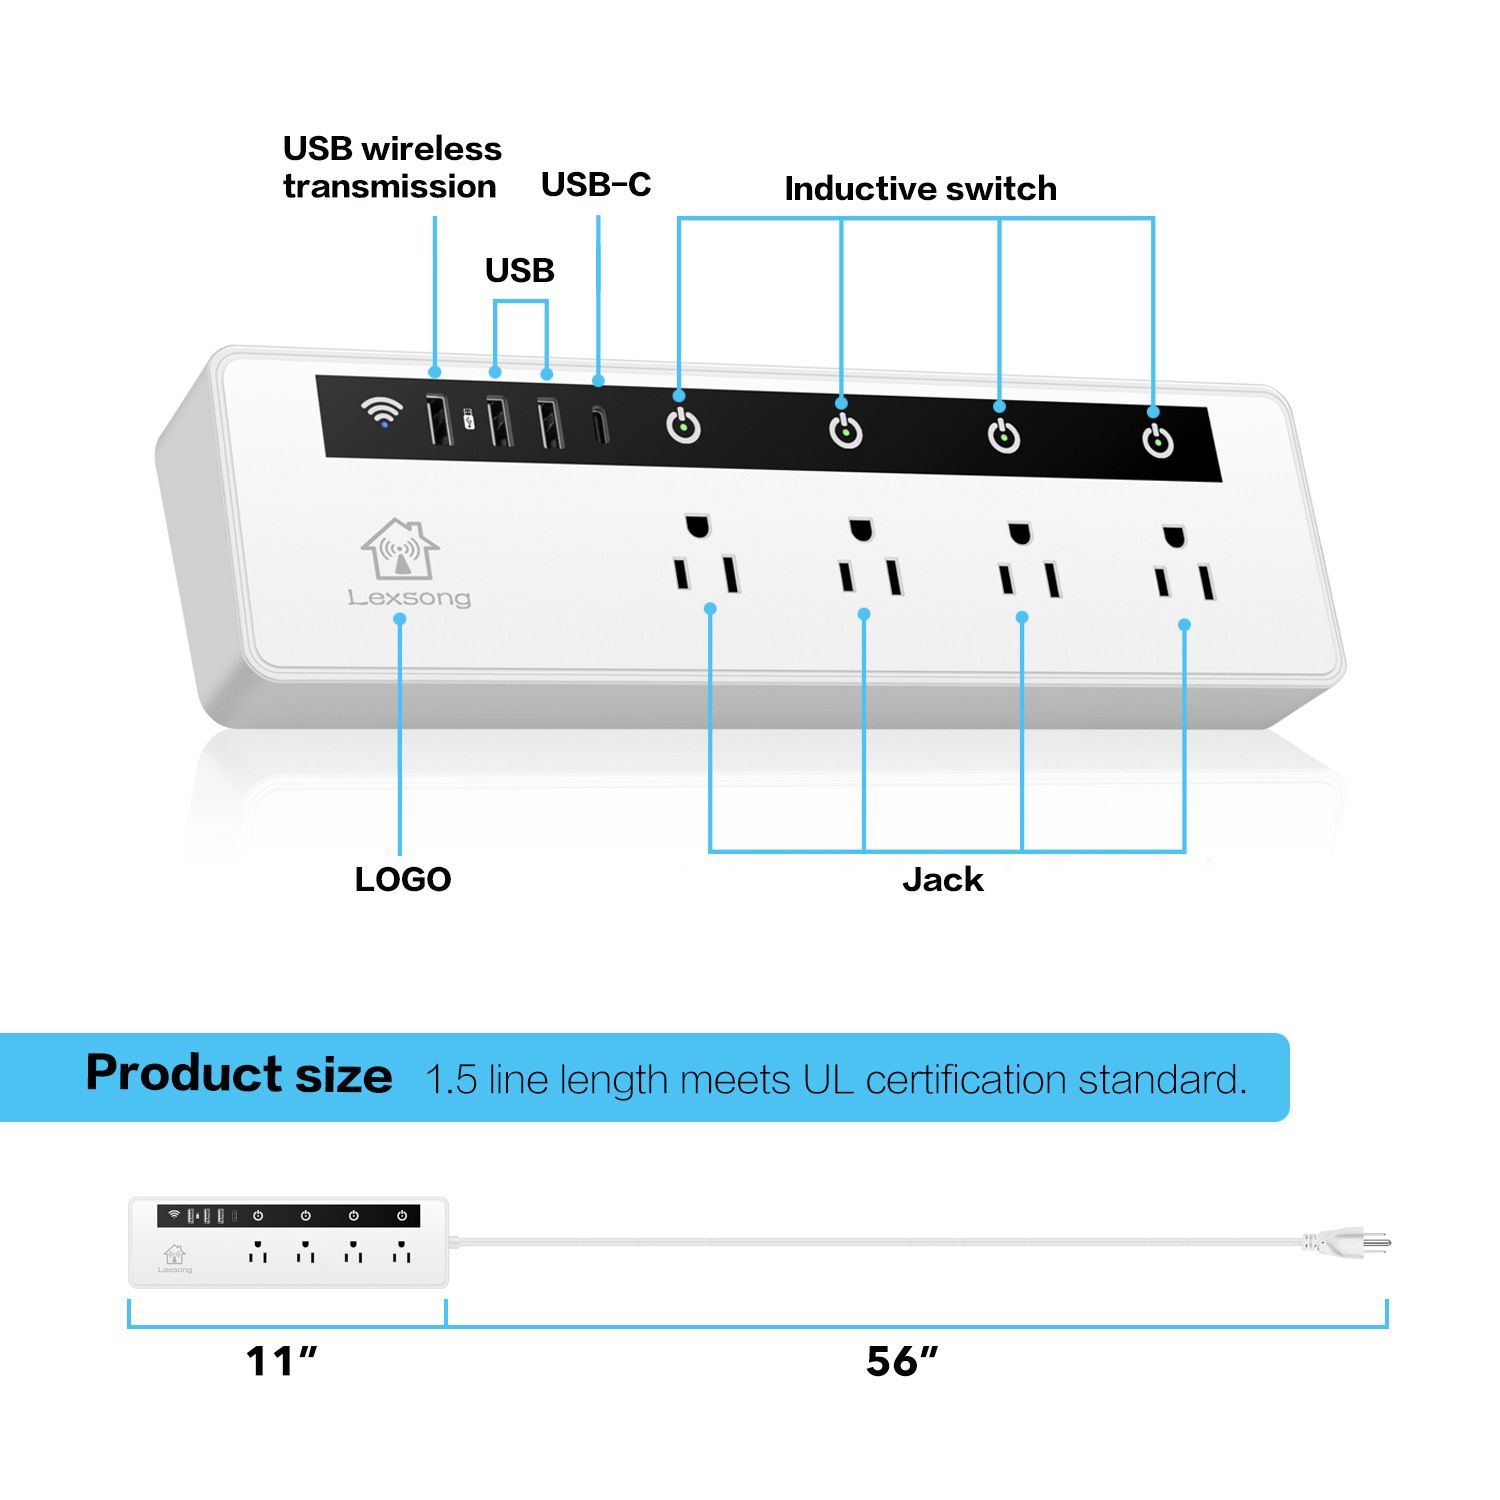 3 USB Charging Ports and Type C Port Voice Control via Alexa and Remote Control of APP WiFi Smart Power Strip Lexsong L1 Surge Protector Have Function of WiFi Storage and Share with 4 Smart Sockets 